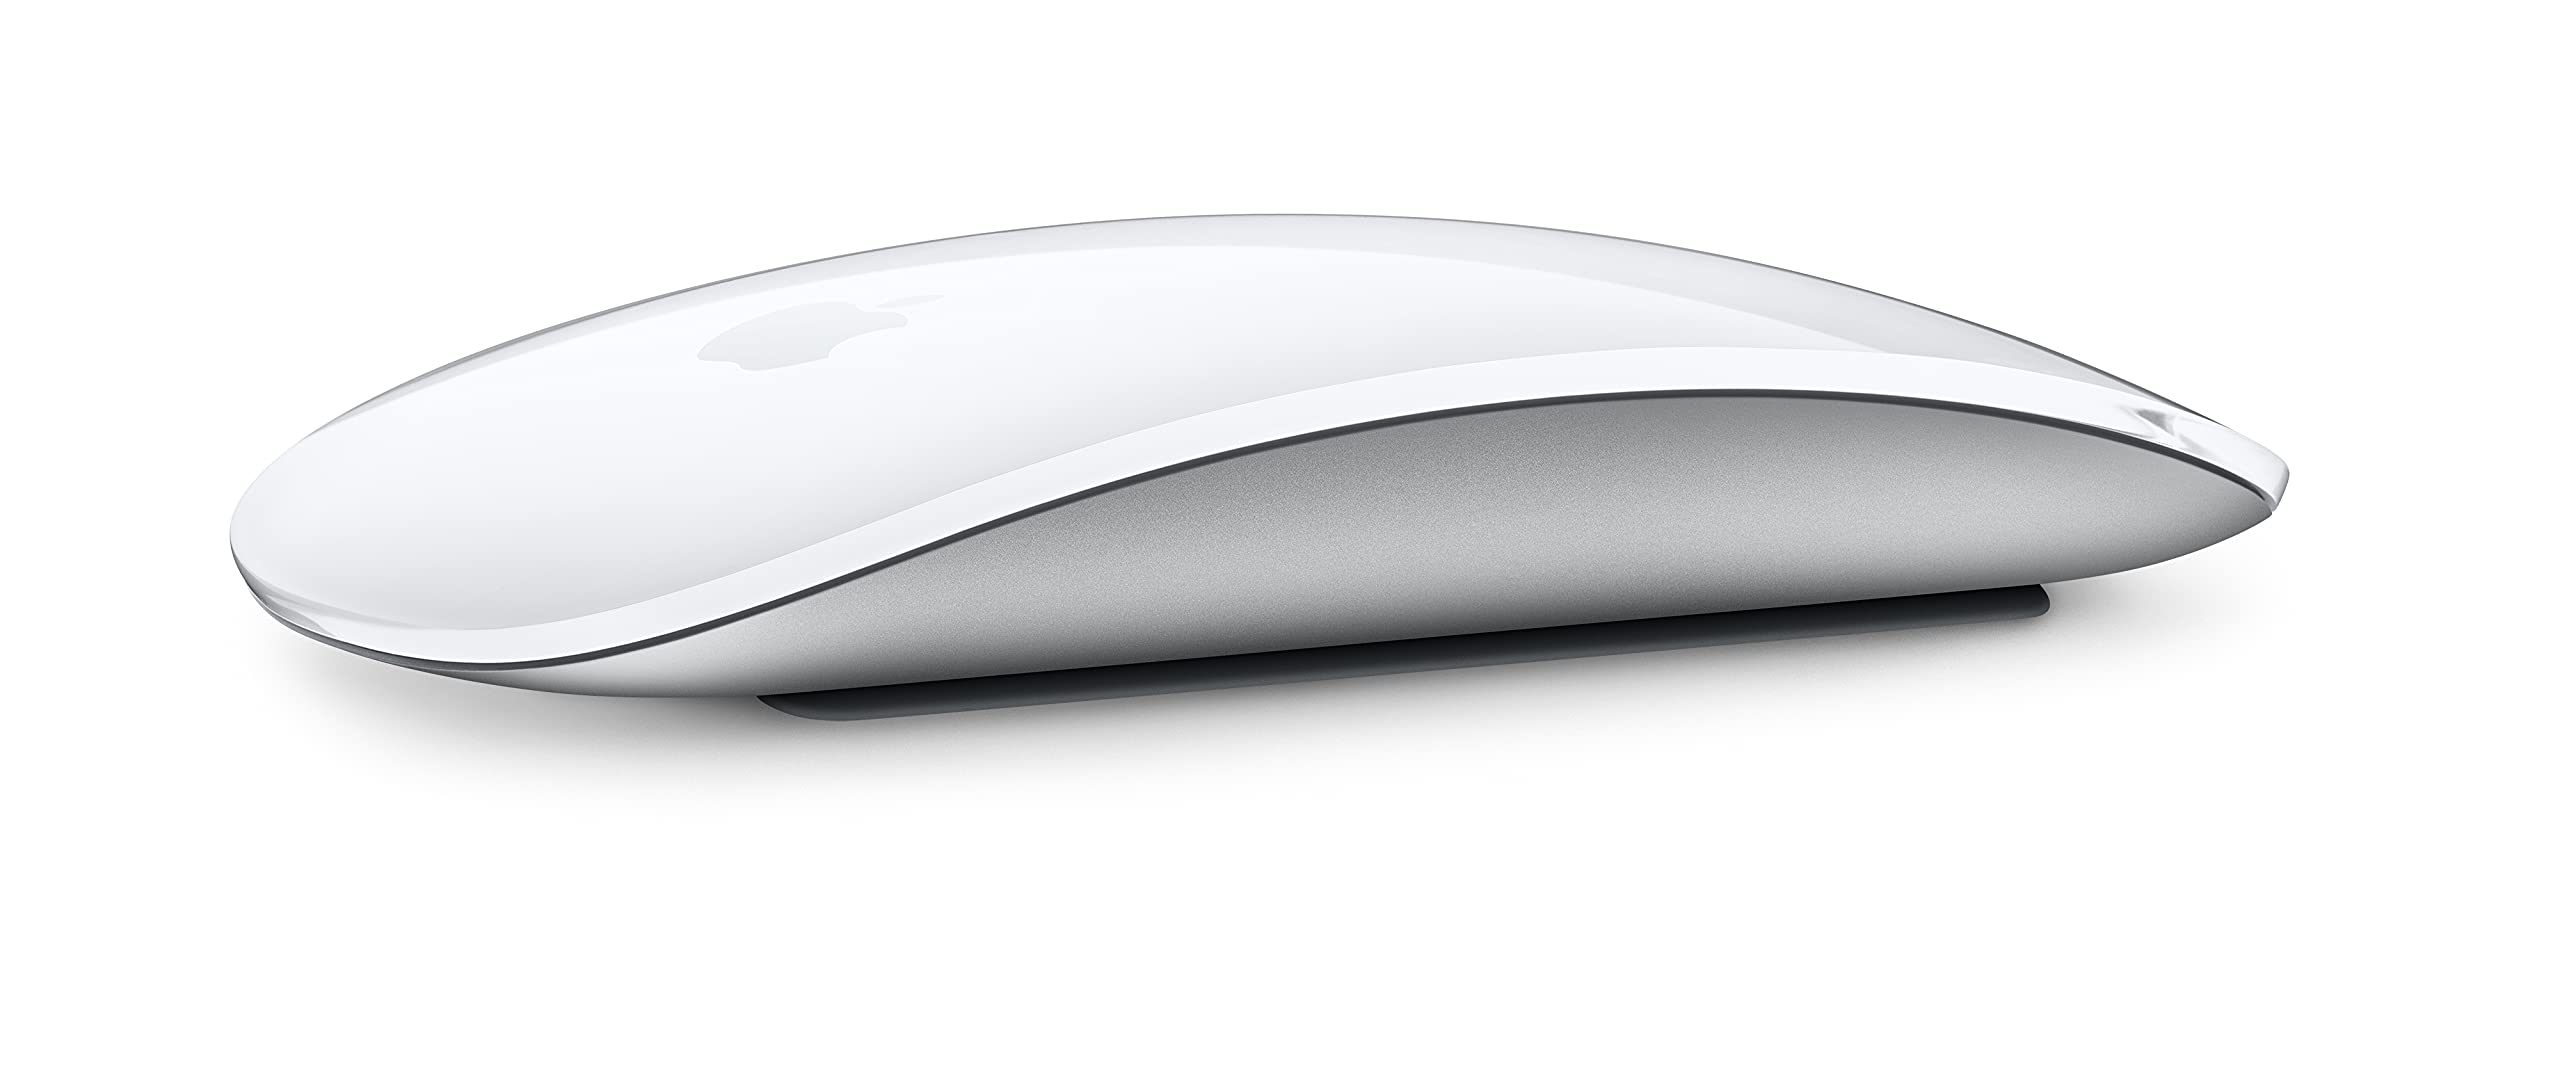 Amazon.com: Apple Magic Mouse: Wireless, Bluetooth, Rechargeable. Works with Mac or iPad; Multi-Touch Surface - White : Office Products $67.99